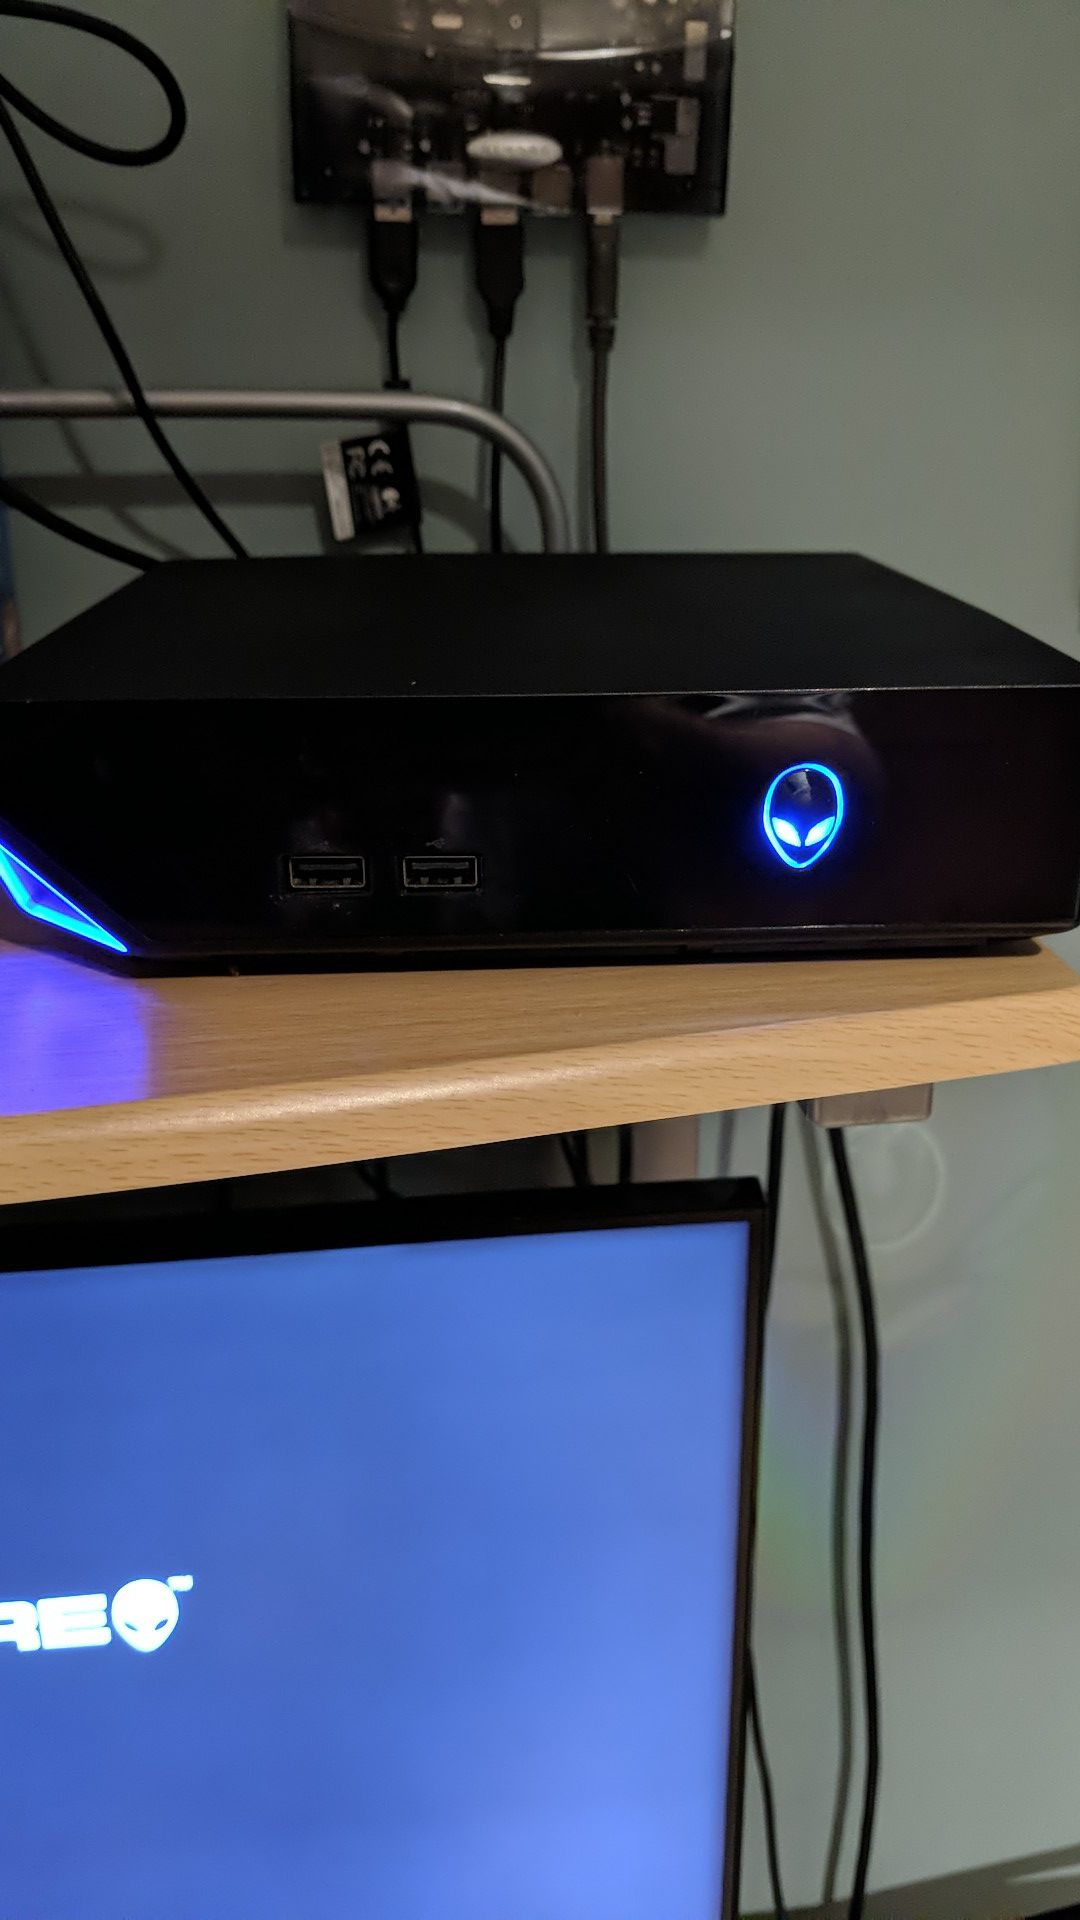 Alienware Alpha computer with monitor, keyboard and mouse